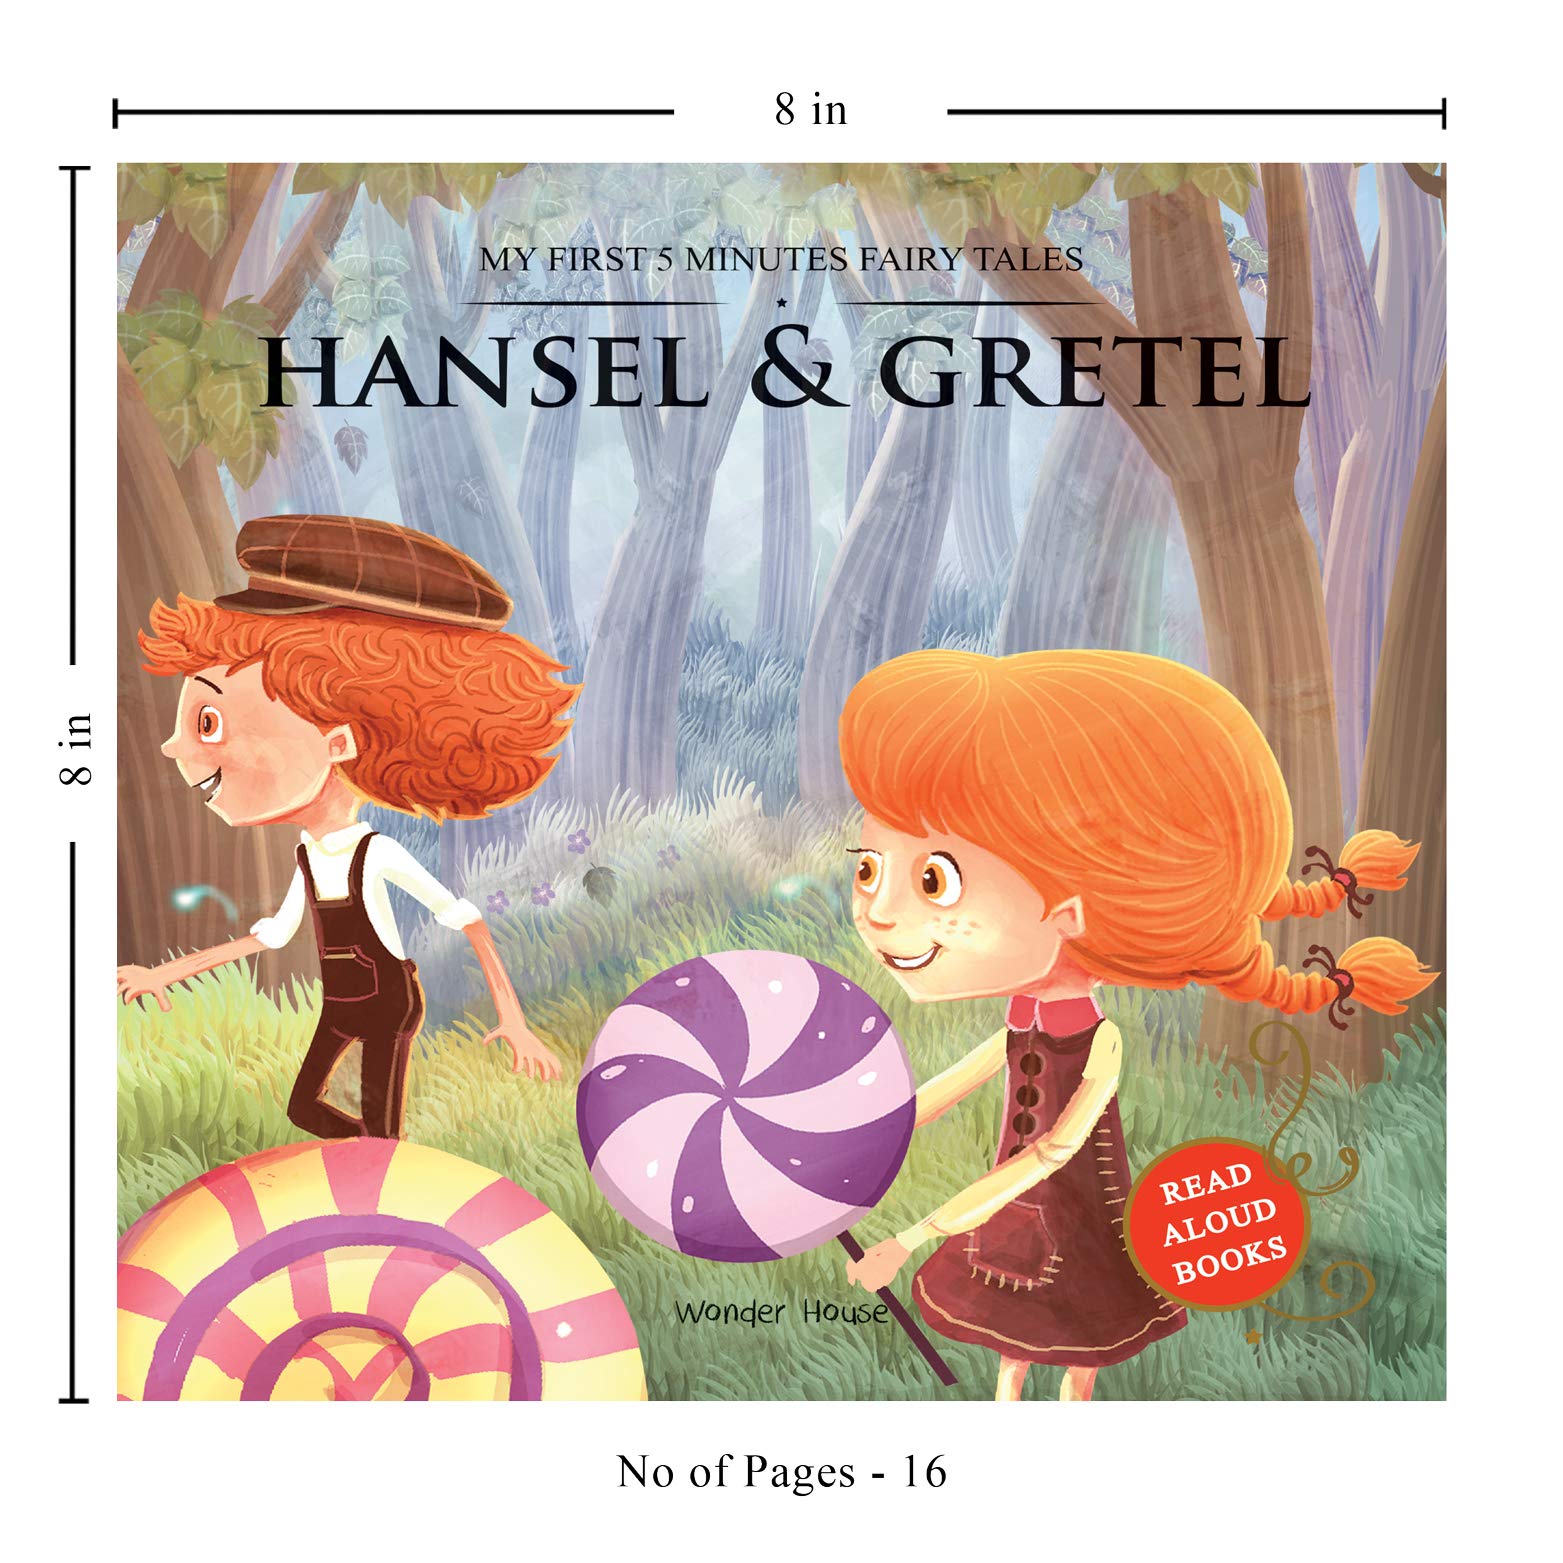 My First 5 Minutes Fairy Tales: Hansel & Gretel